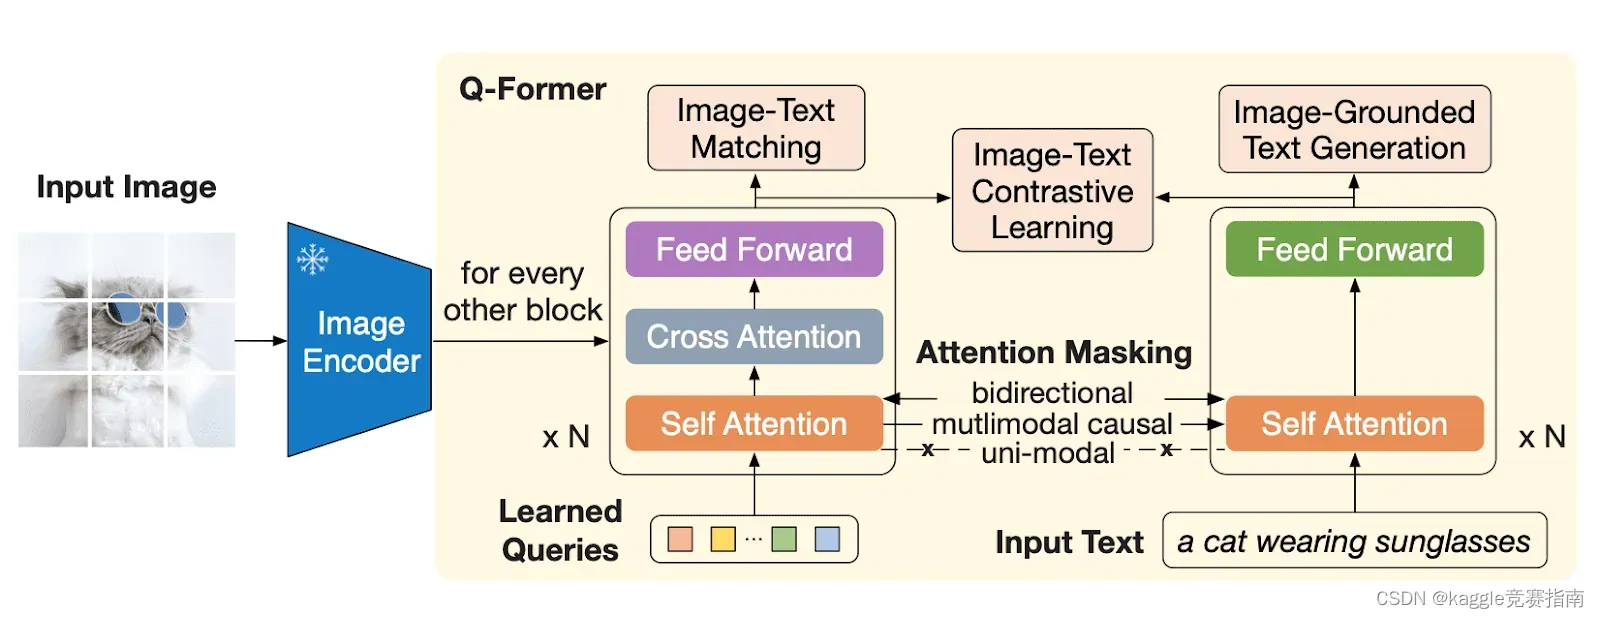 Overview of Q-Former and the first stage of vision-language representation learning in BLIP-2